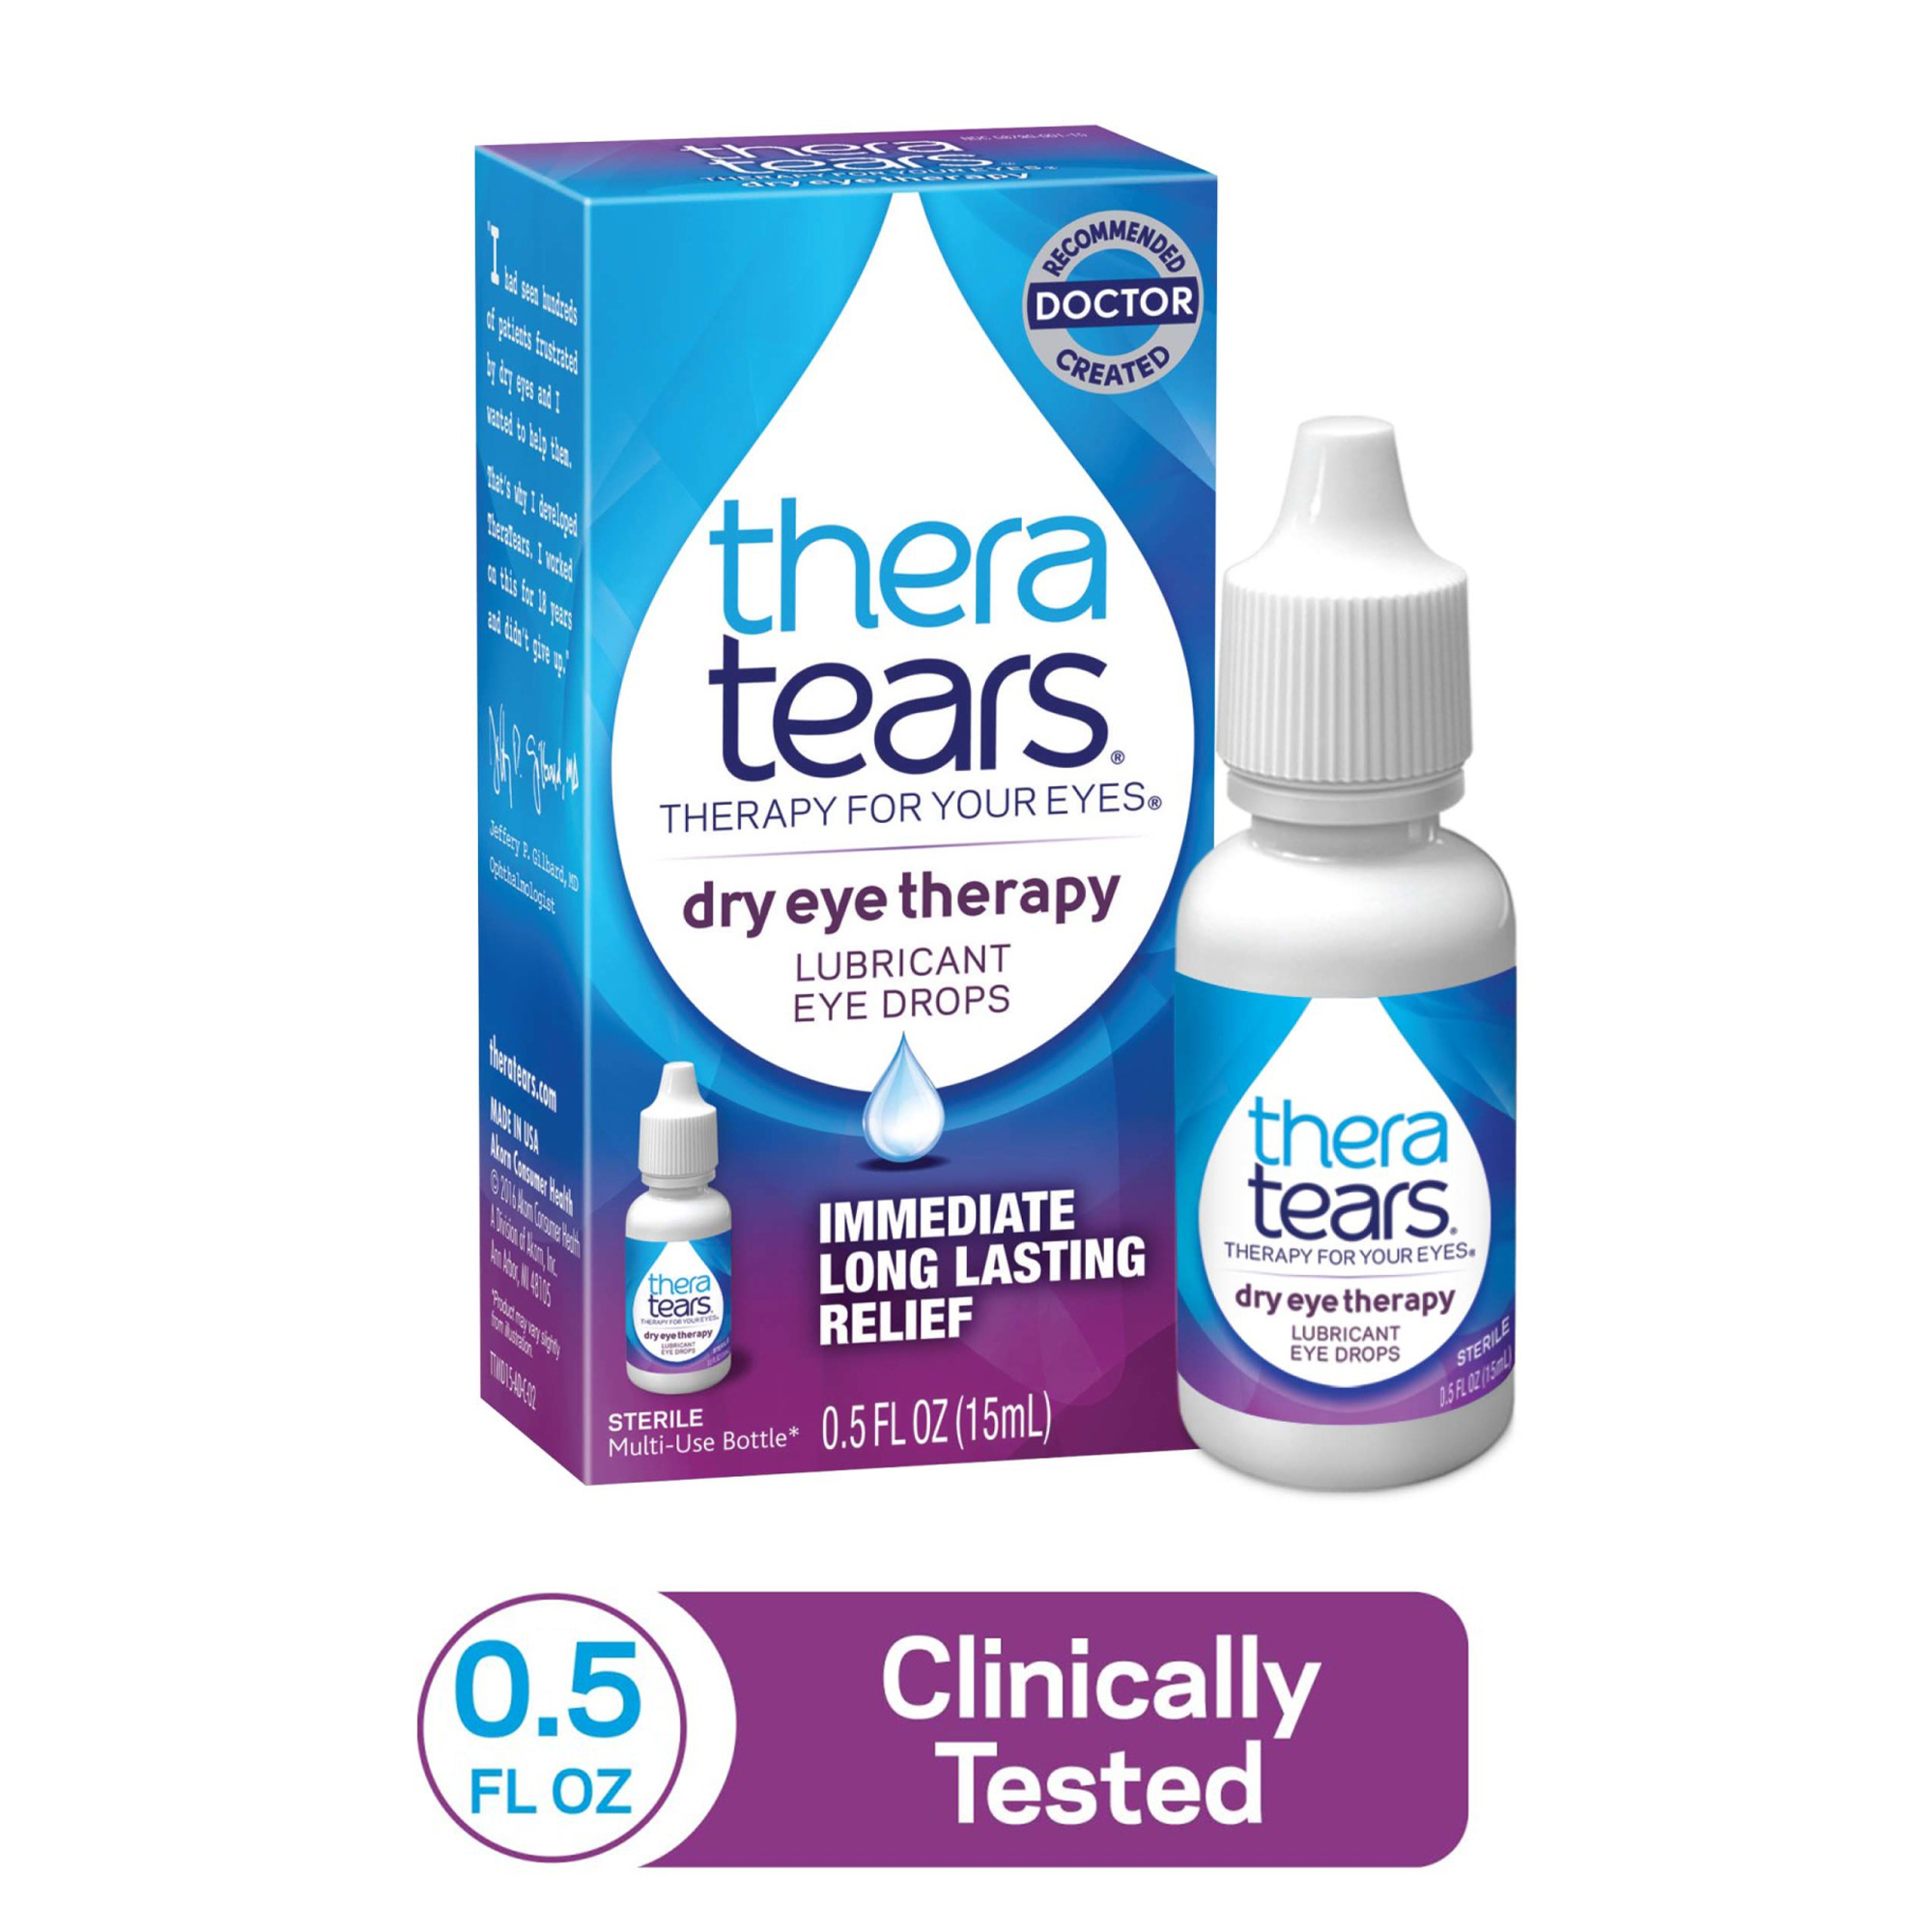 TheraTears Dry Eye Therapy Lubricating Eye Drops for Dry Eyes, 0.5 fl oz Bottle - image 1 of 14